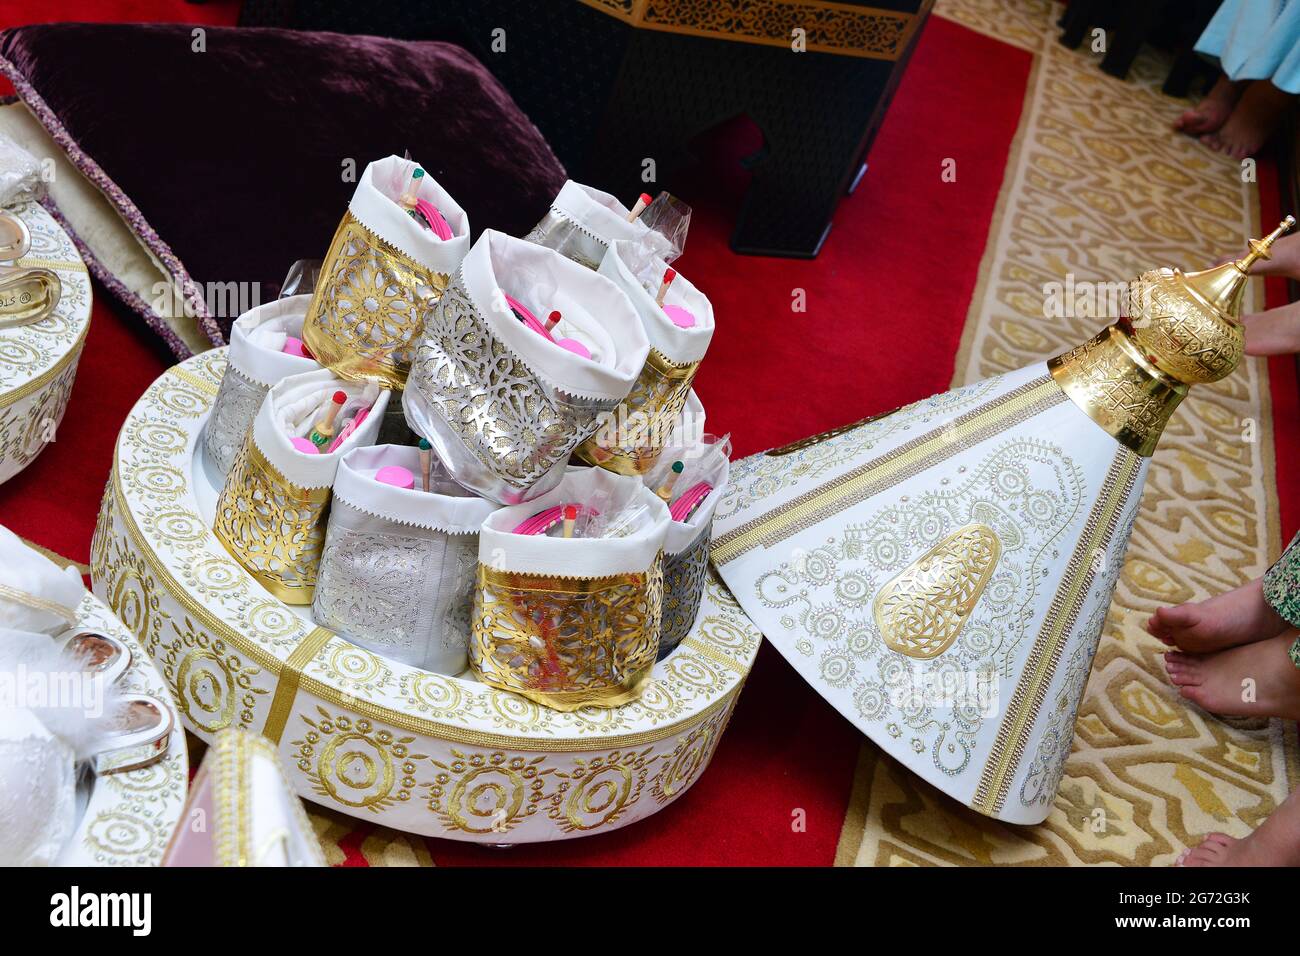 Moroccan Tyafer, traditional gift containers for the wedding ceremony, decorated with ornate golden embroidery.Moroccan henna .Moroccan wedding gifts Stock Photo